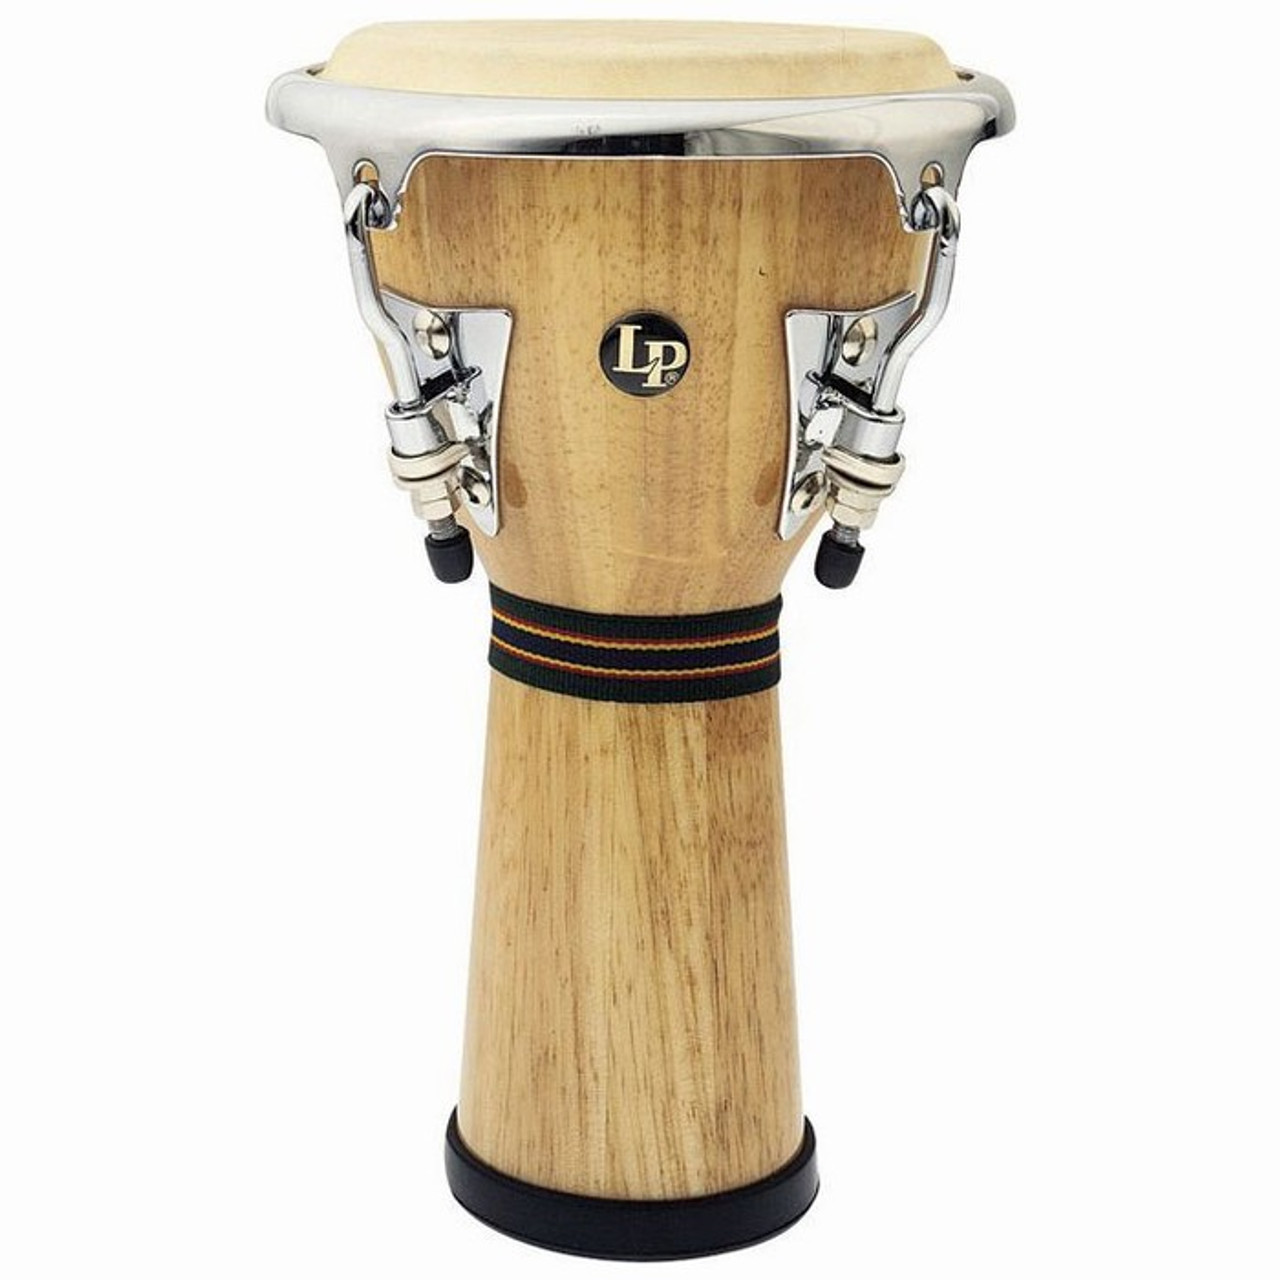 Latin Percussion Aspire Tunable Djembe - Natural with Chrome